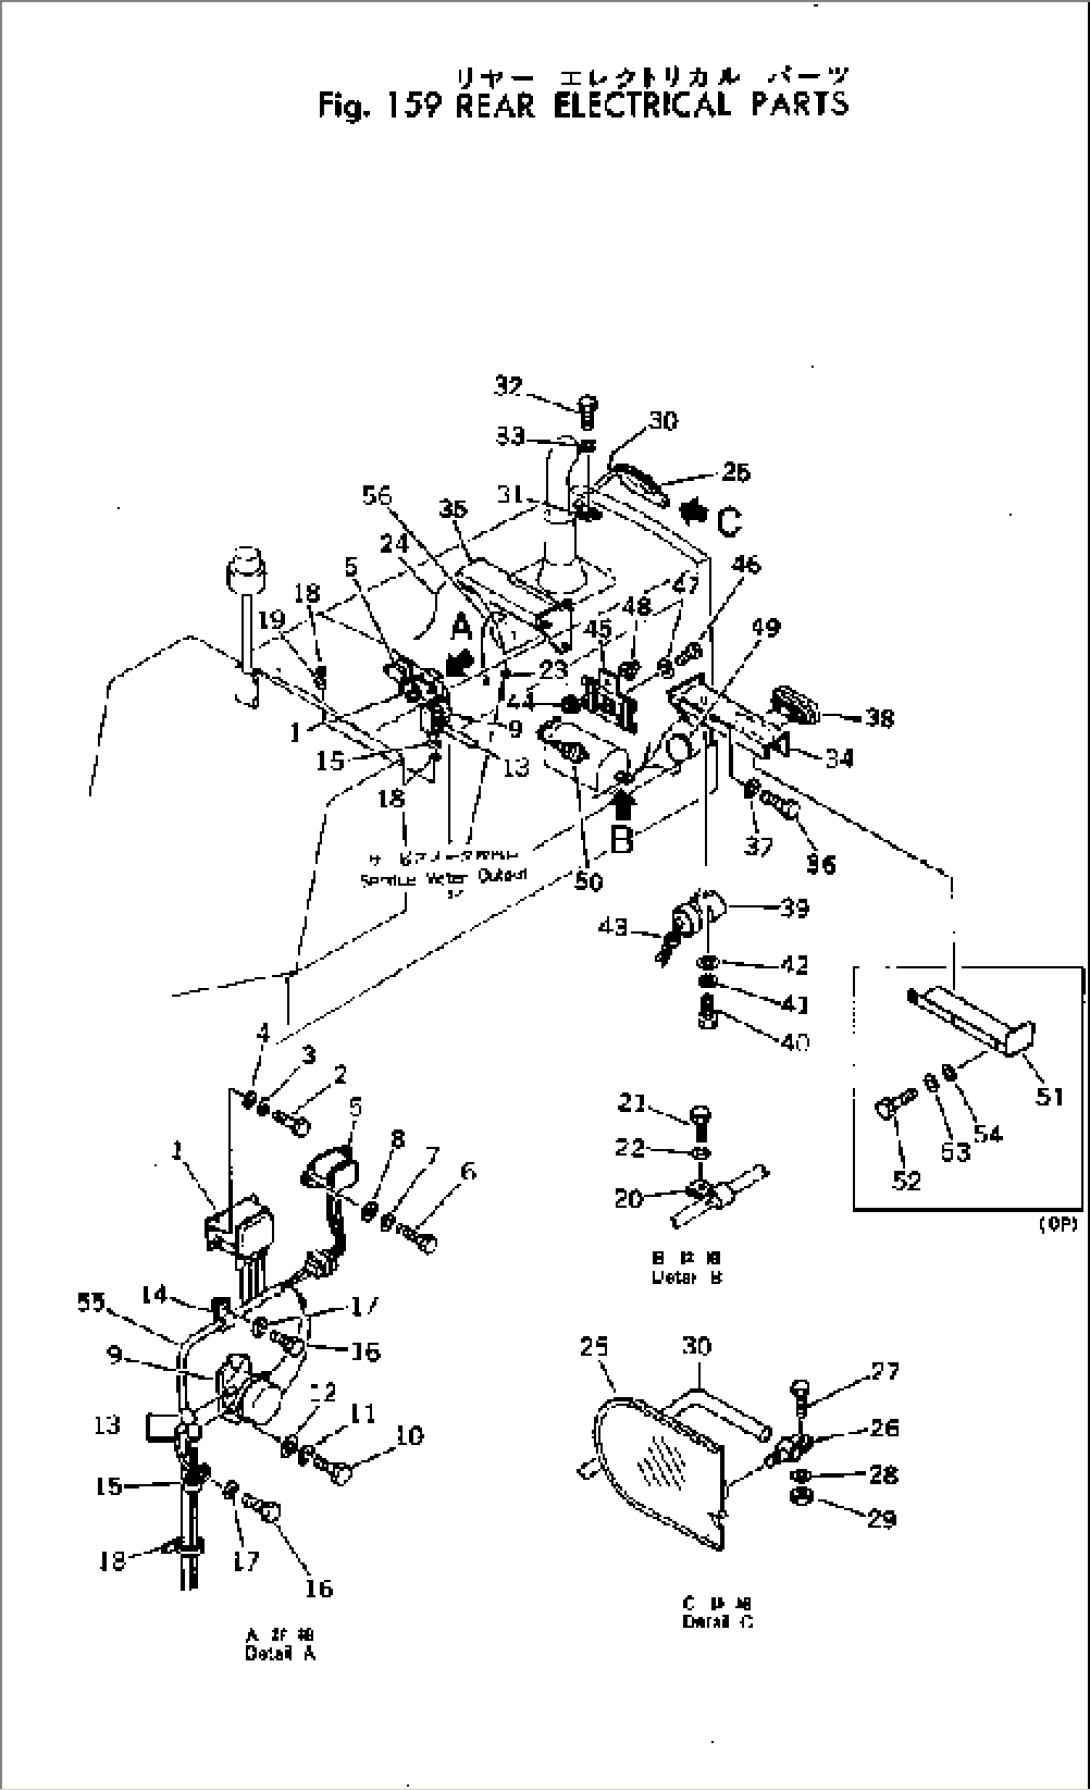 REAR ELECTRICAL PARTS